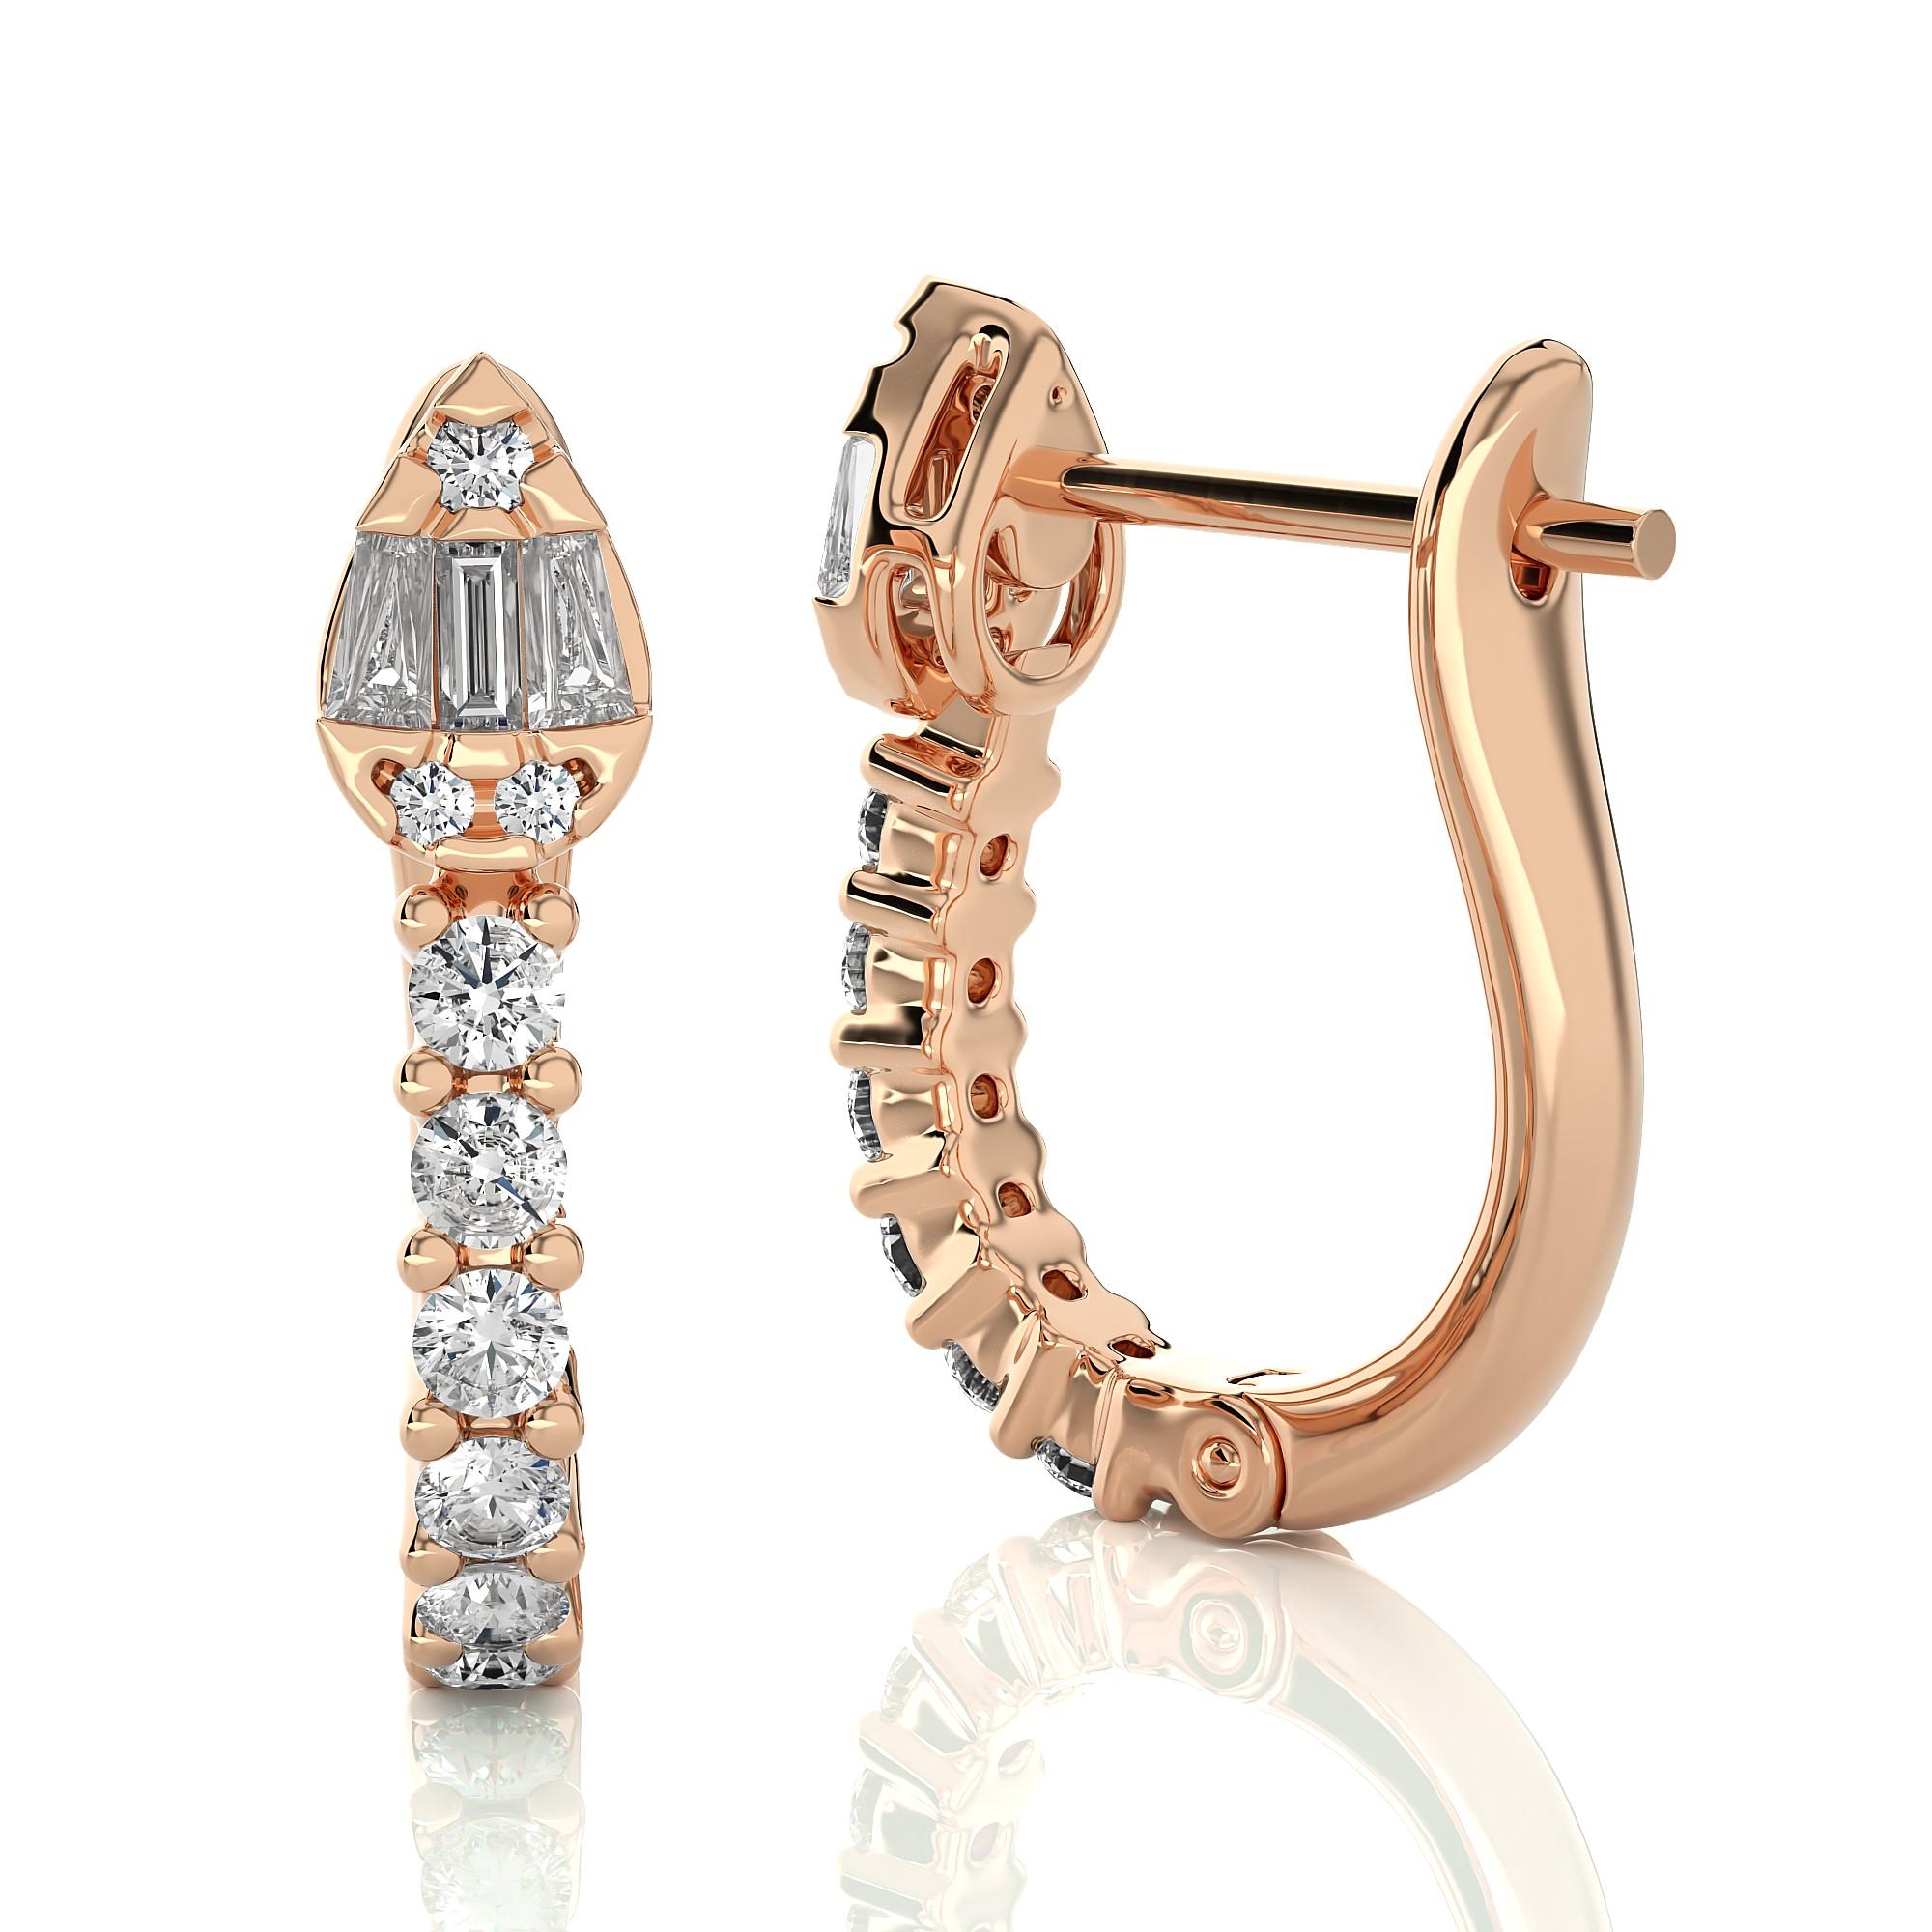 Modern Diamond Huggie Earrings.

Unveiling these stunning Natural Earth-Mined Diamond stud earrings, the pair boasts a row of diamonds, lovingly ensconced in a secure classic 4-prong setting, forming a scintillating display with a combined weight of